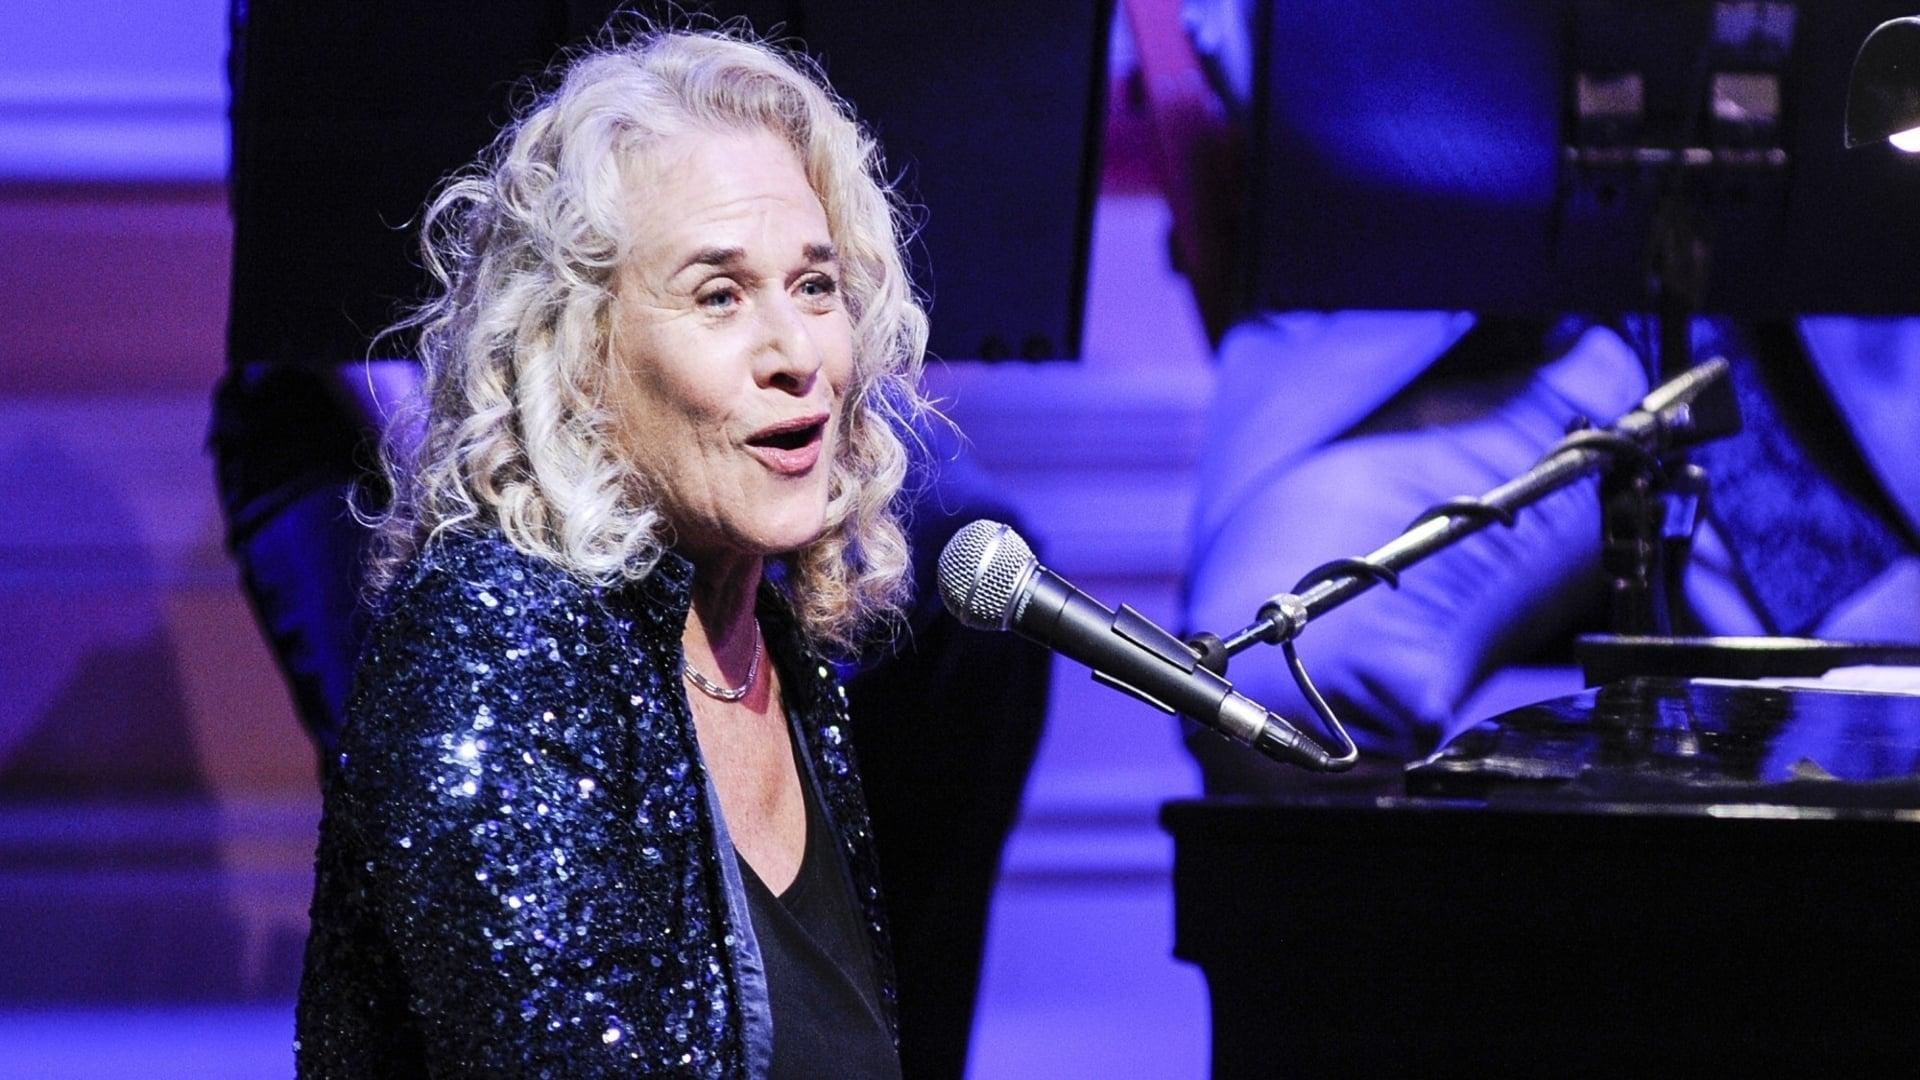 A MusiCares Tribute to Carole King backdrop